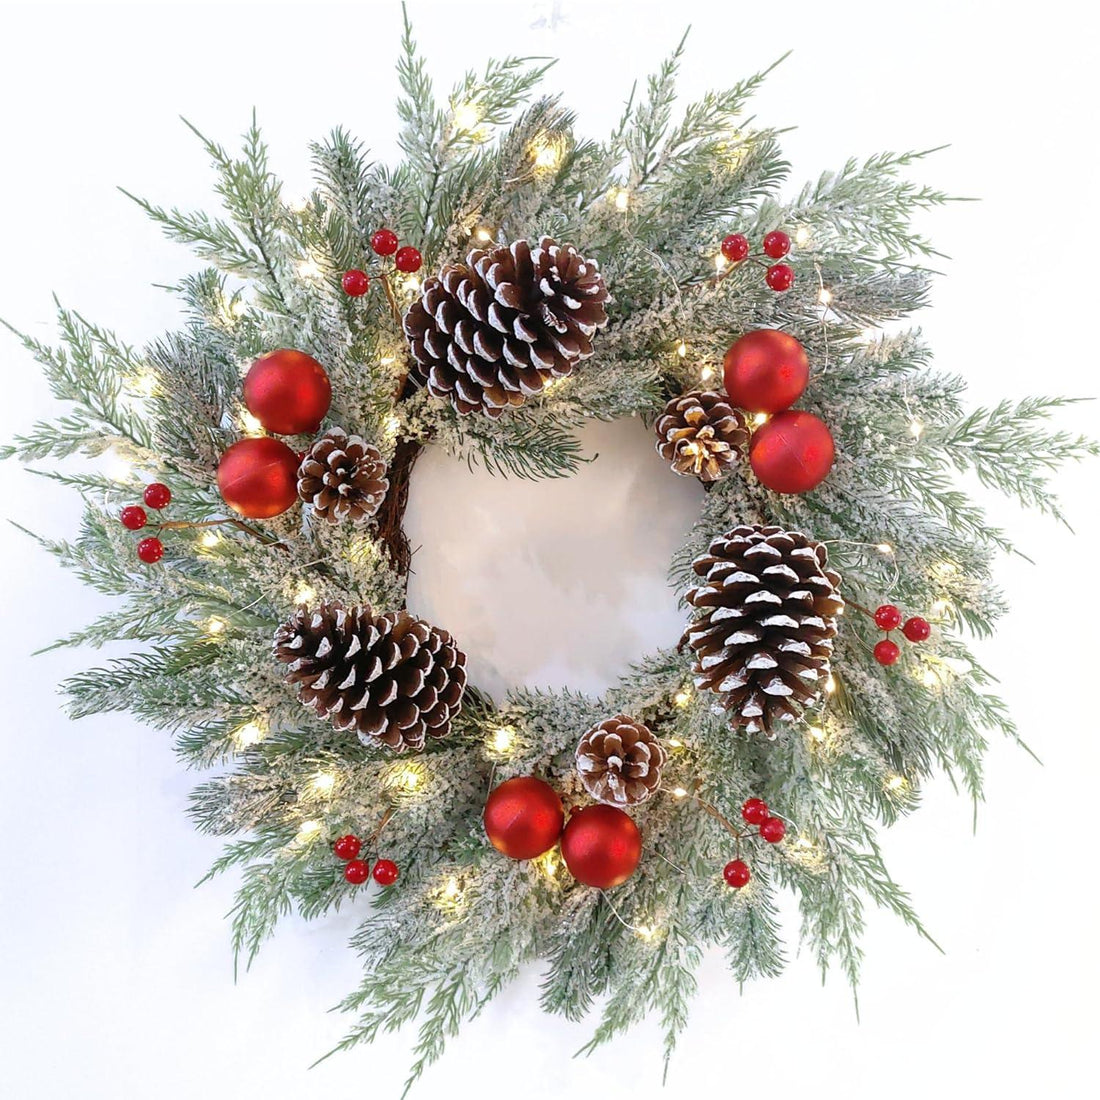 24 Inch PreLit Christmas Wreaths for Front Door with Large Pinecones BLarge Pinecones Battery Operated 40 LED Lights